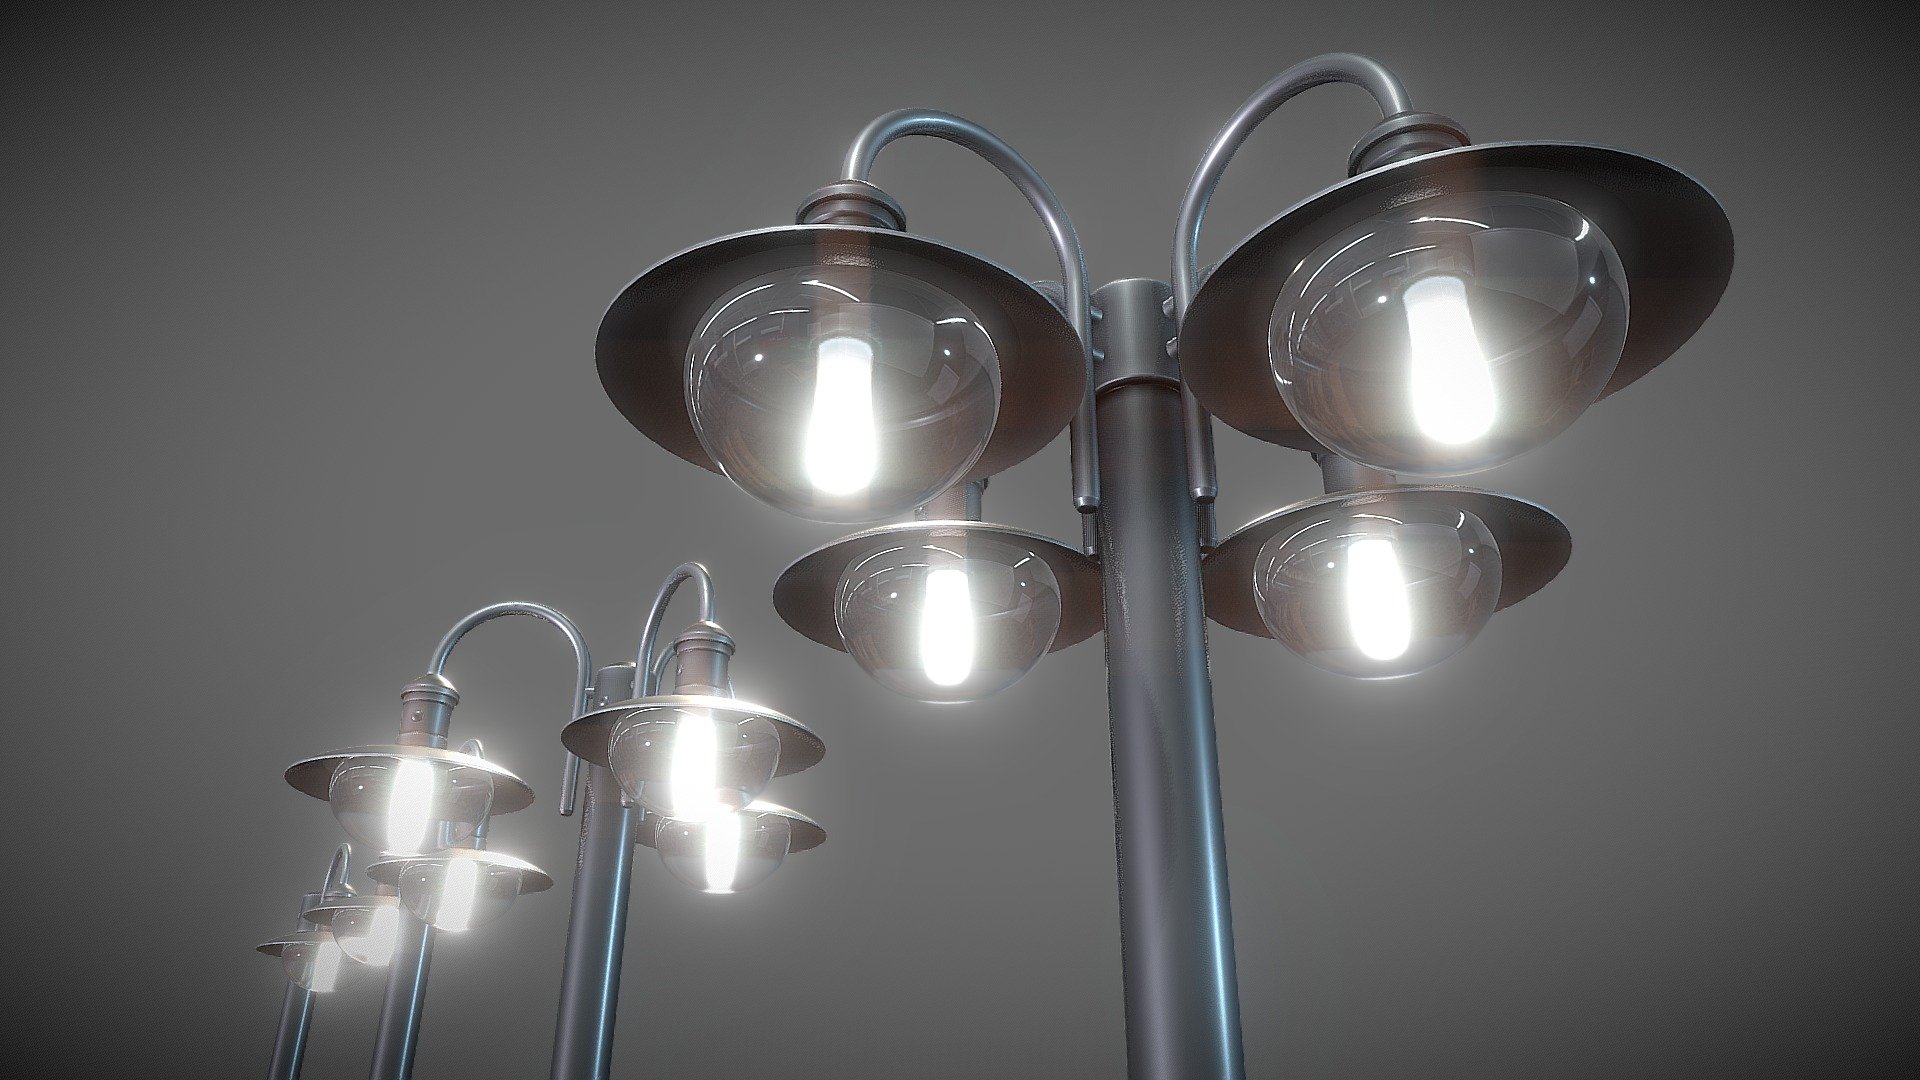 The basic high-poly version of the street light number 7.



Here are some other street lights: 




Street Light (1) (Low-Poly-Version)

Street Light (1) Station Clock (High-Poly)

Street Light (2) Wall-Version (High-Poly)

Street Light (3) (Low-Poly Version)

Street Light (4) (High-Poly Version)

Street Light (5) High-Poly Version

Street Light (6) (Low-Poly Basic Version)

Street Light (6) (Low-Poly Green Version)

Street Light (6) (Low-Poly Red Version)

Street Light 6 (Low-Poly Galvanized Version)



Modeled and textured by 3DHaupt in Blender-3D - Street Light (7) (Basic High-Poly Version) - Buy Royalty Free 3D model by VIS-All-3D (@VIS-All) 3d model